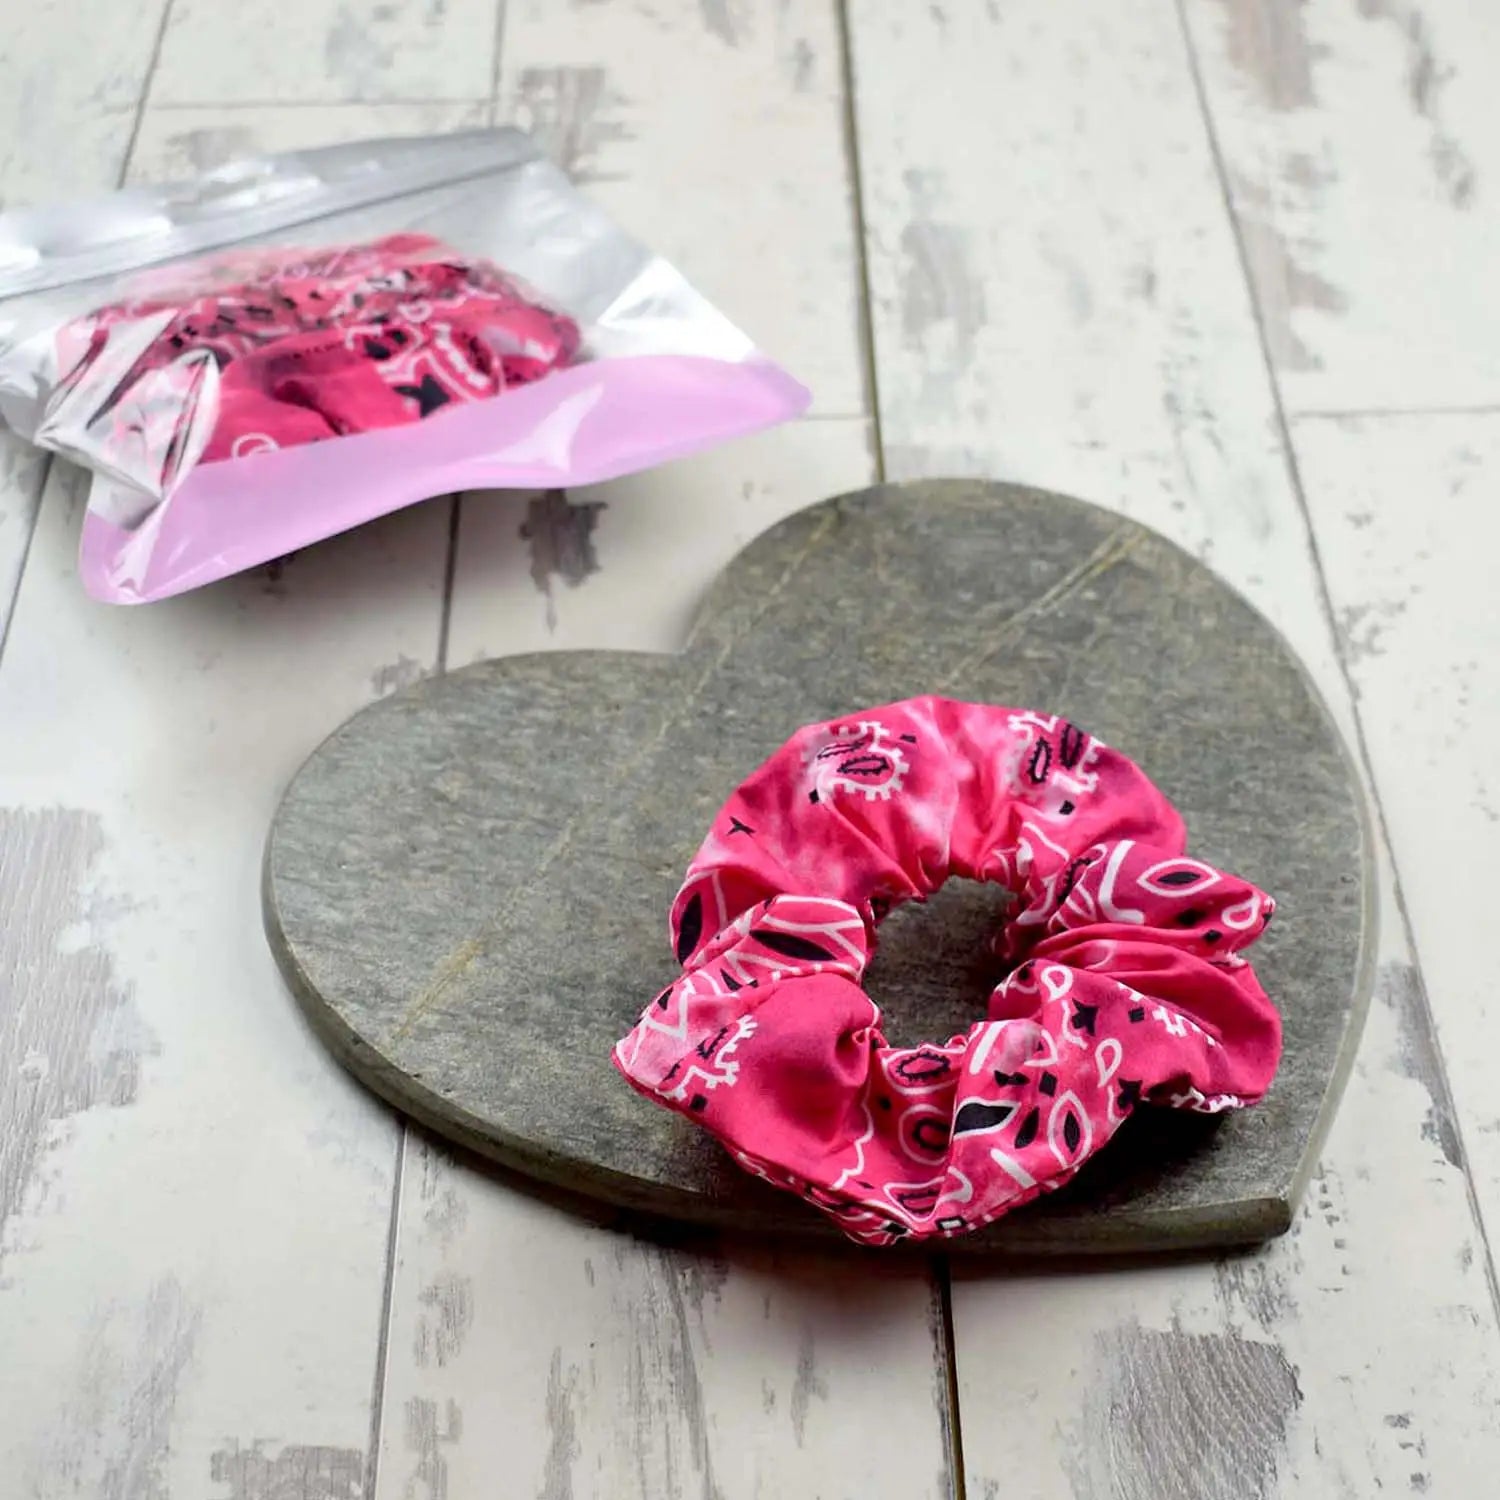 Fuchsia paisley scrunchie on a heart-shaped stone surface, with a coordinating transparent bag next to it.